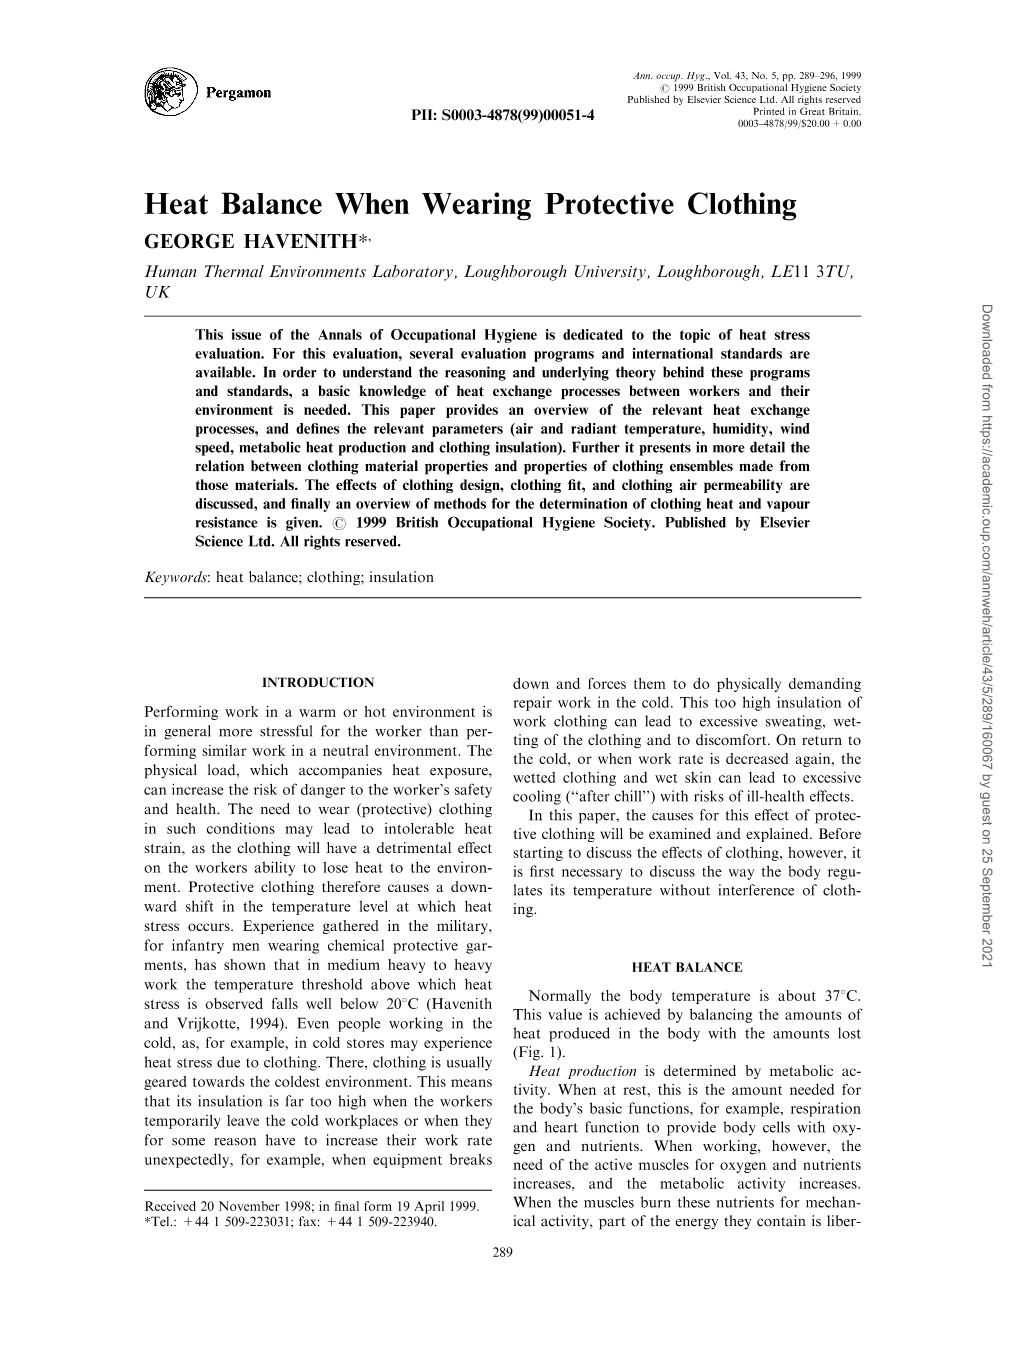 Heat Balance When Wearing Protective Clothing